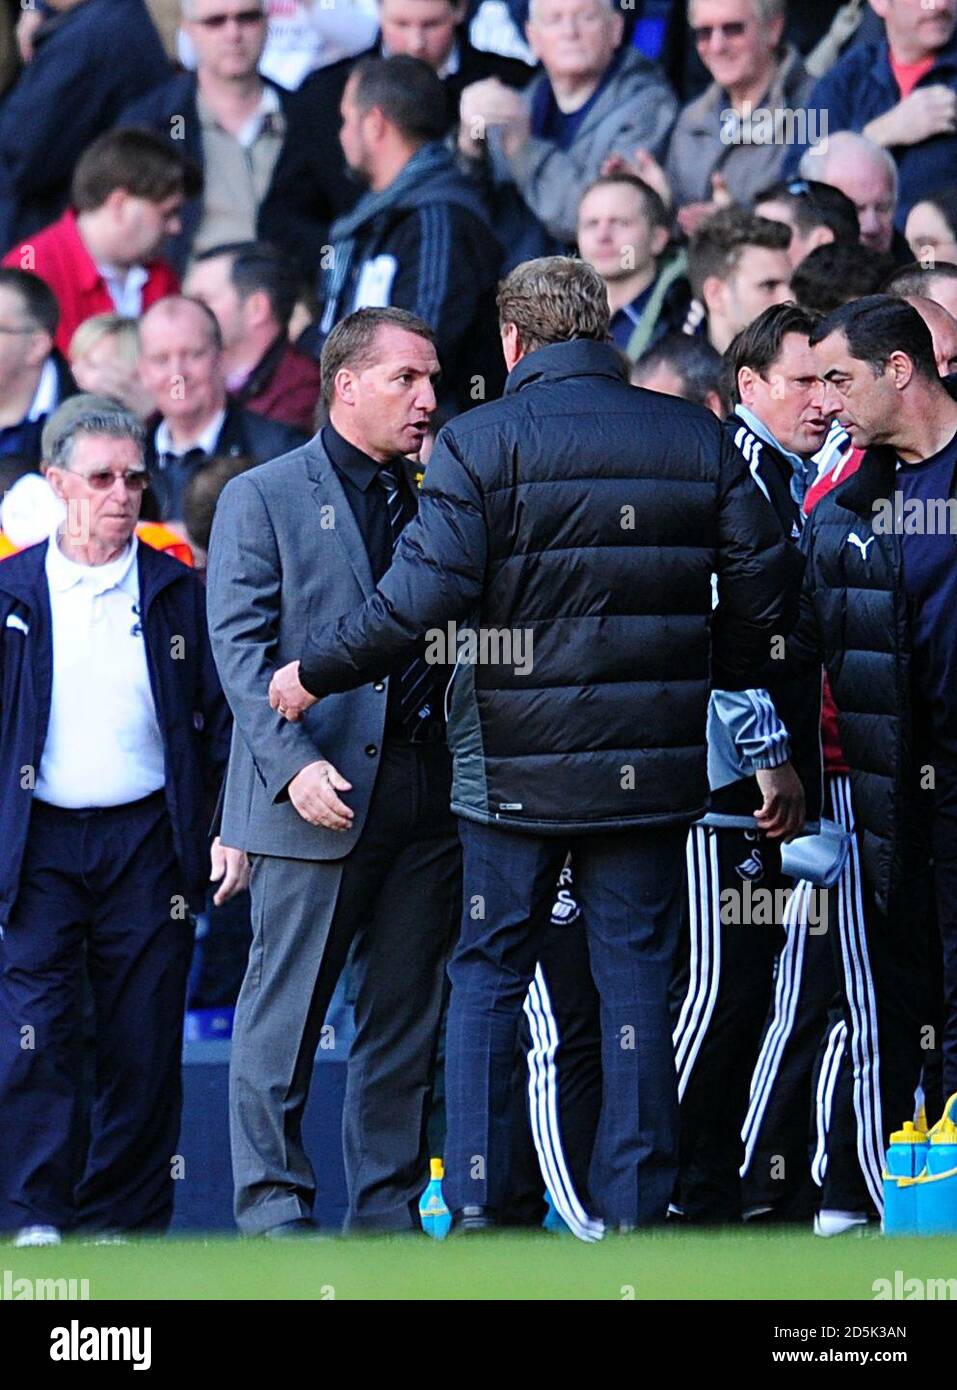 Swansea City manager Brendan Rodgers (left) and Tottenham Hotspur manager Harry Redknapp (right) after the final whistle Stock Photo